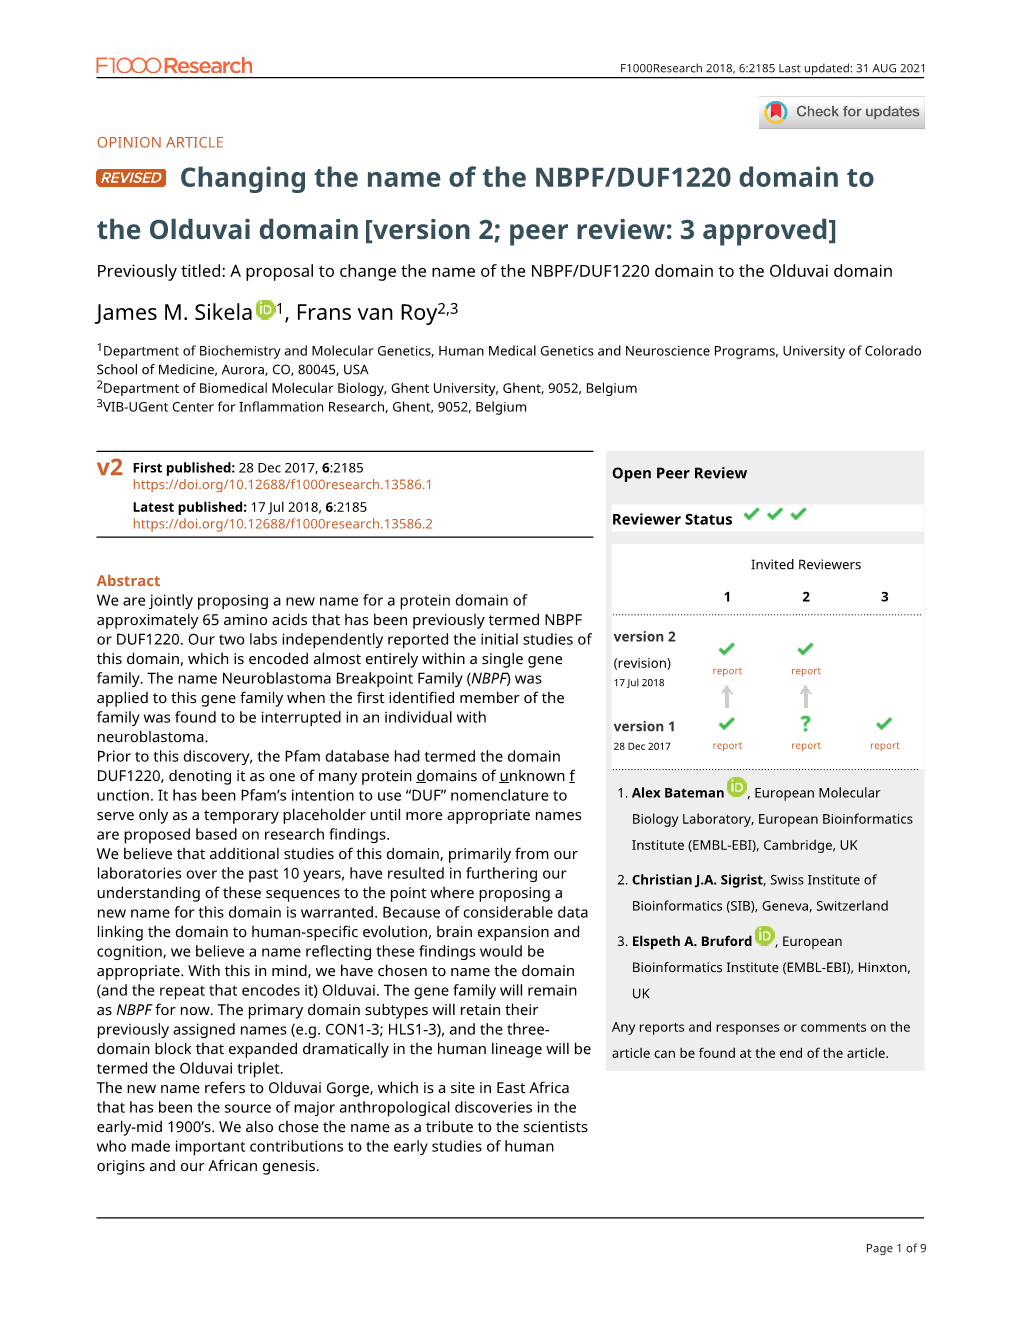 Changing the Name of the NBPF/DUF1220 Domain to the Olduvai Domain [Version 2; Peer Review: 3 Approved]